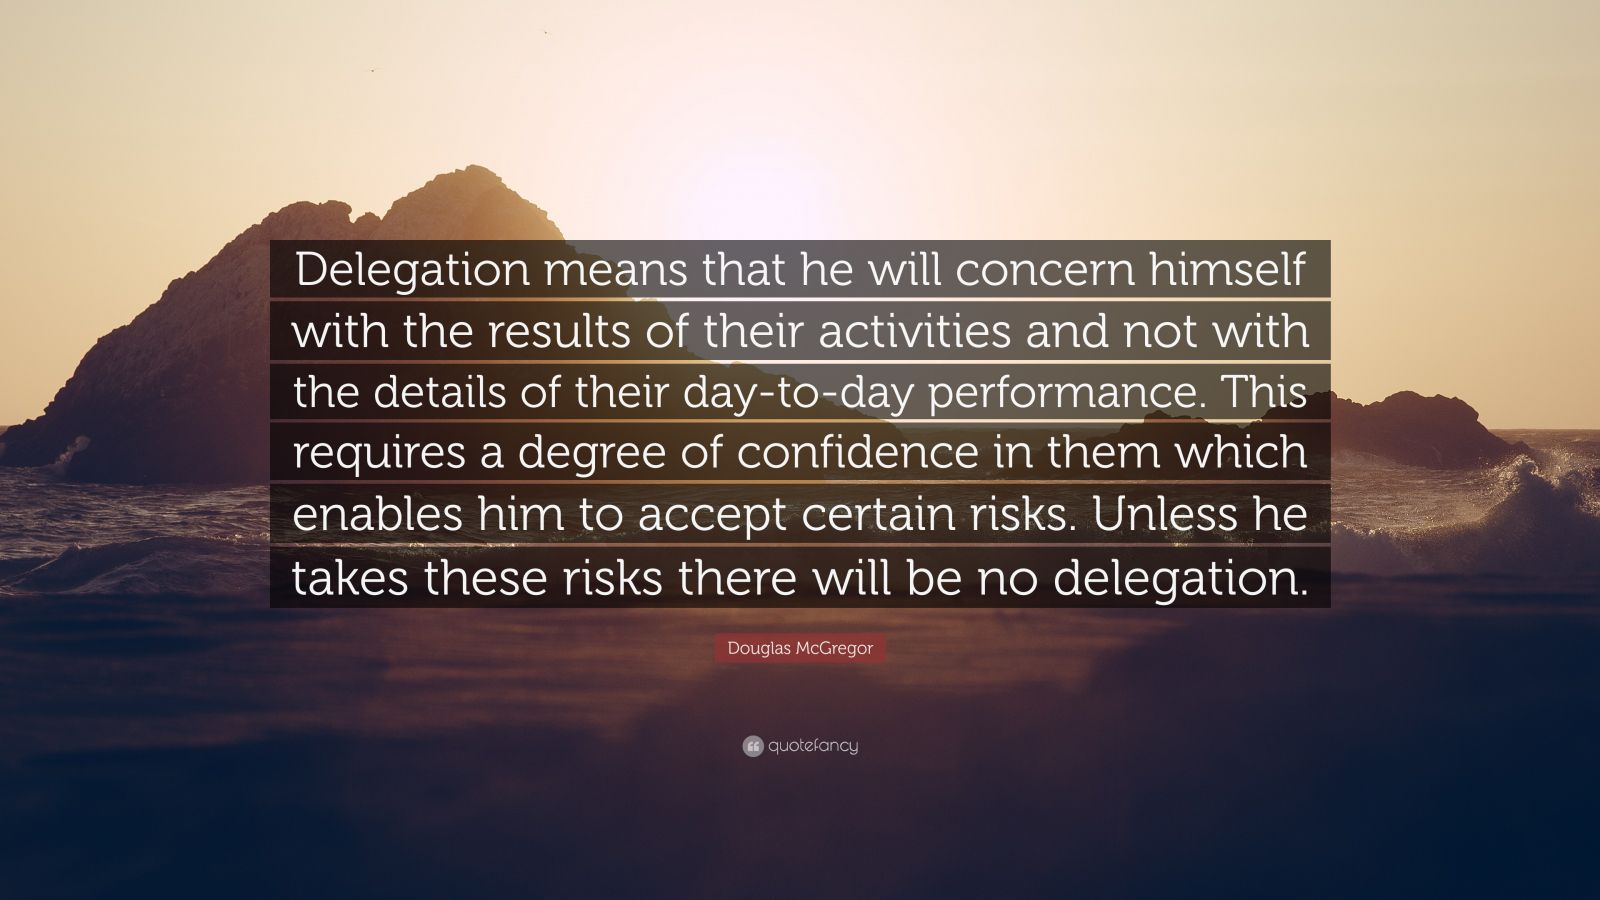 Douglas McGregor Quote: “Delegation means that he will concern himself